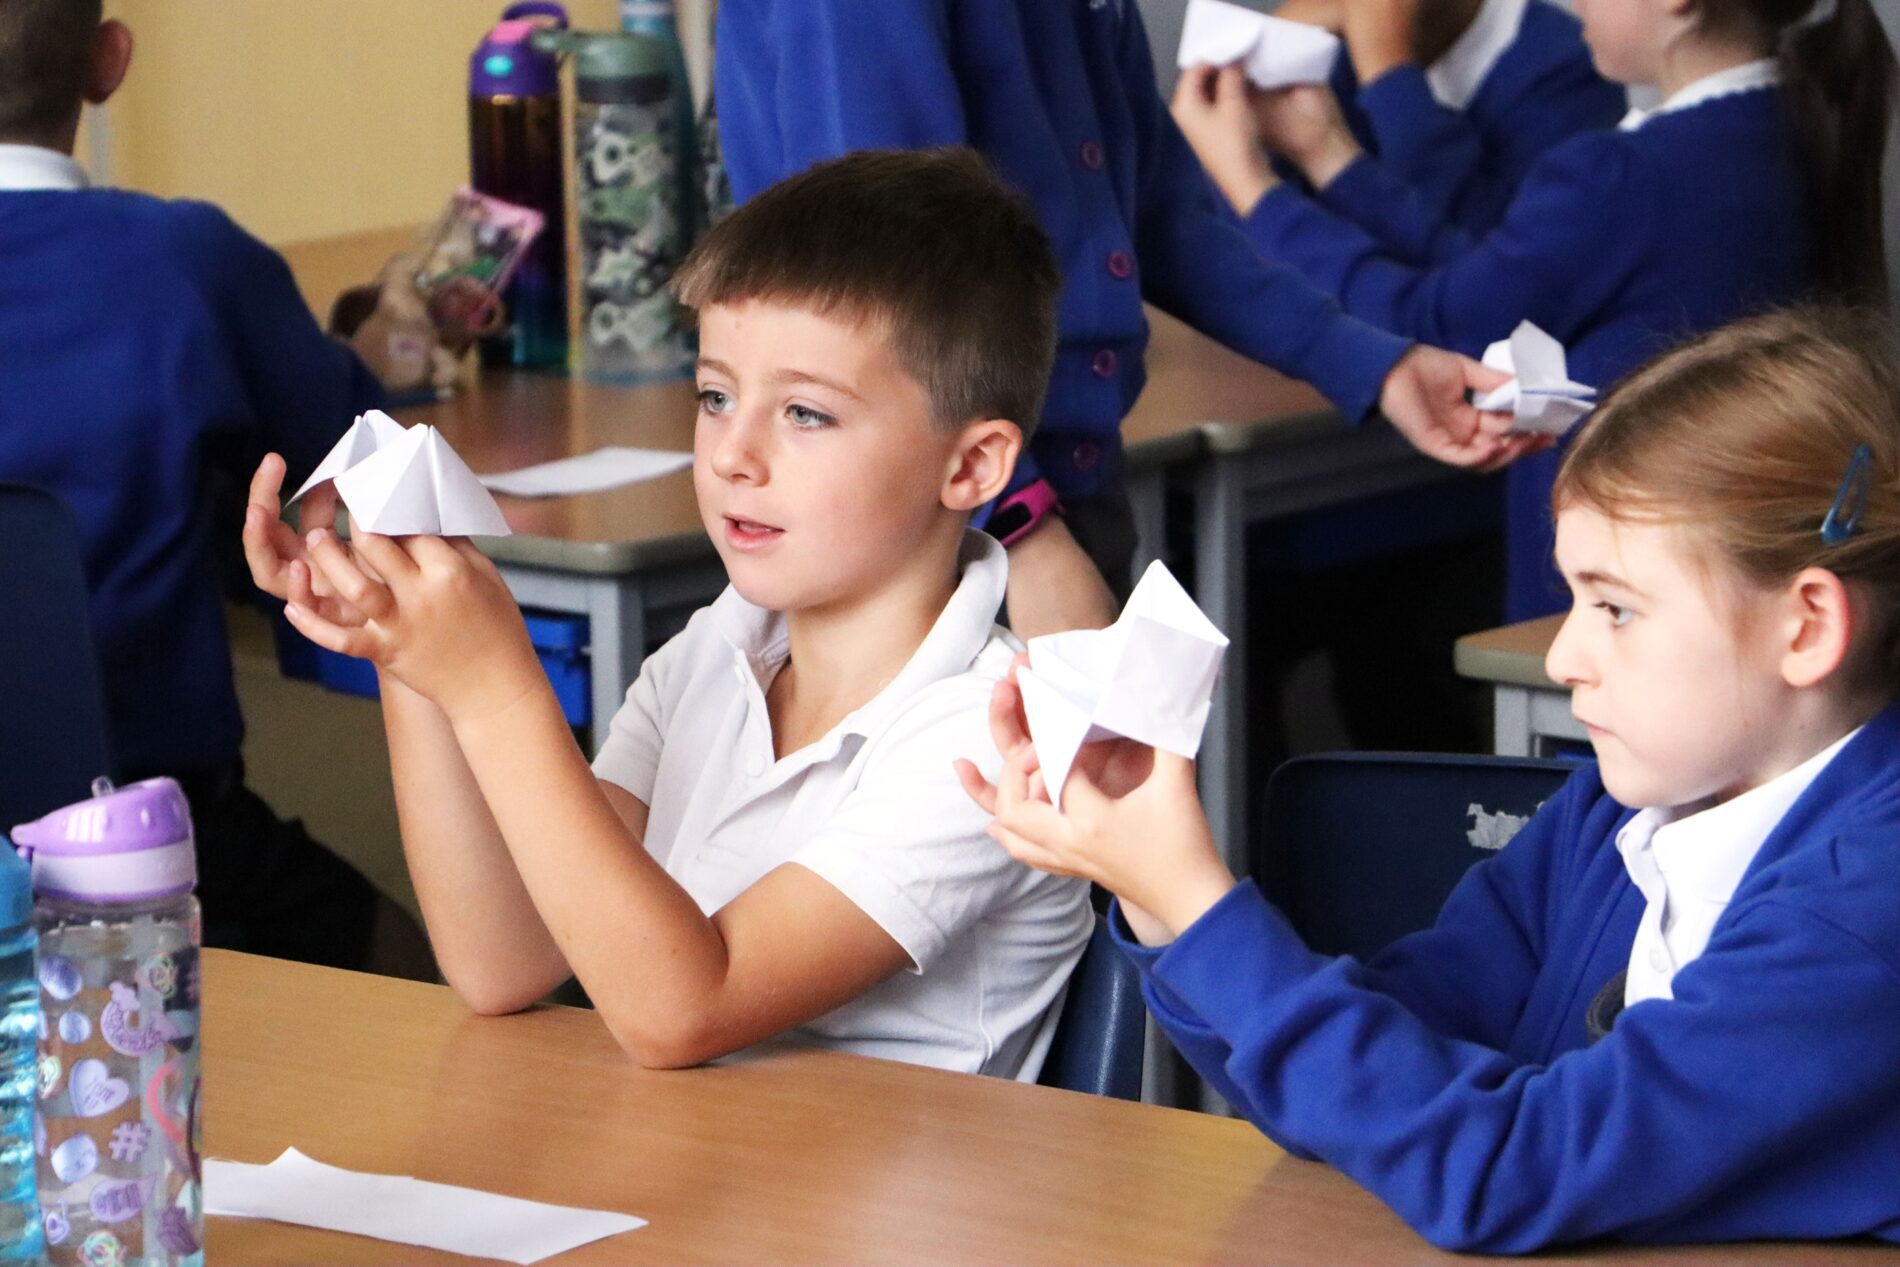 two pupils playing with chatterboxes, folded up origami